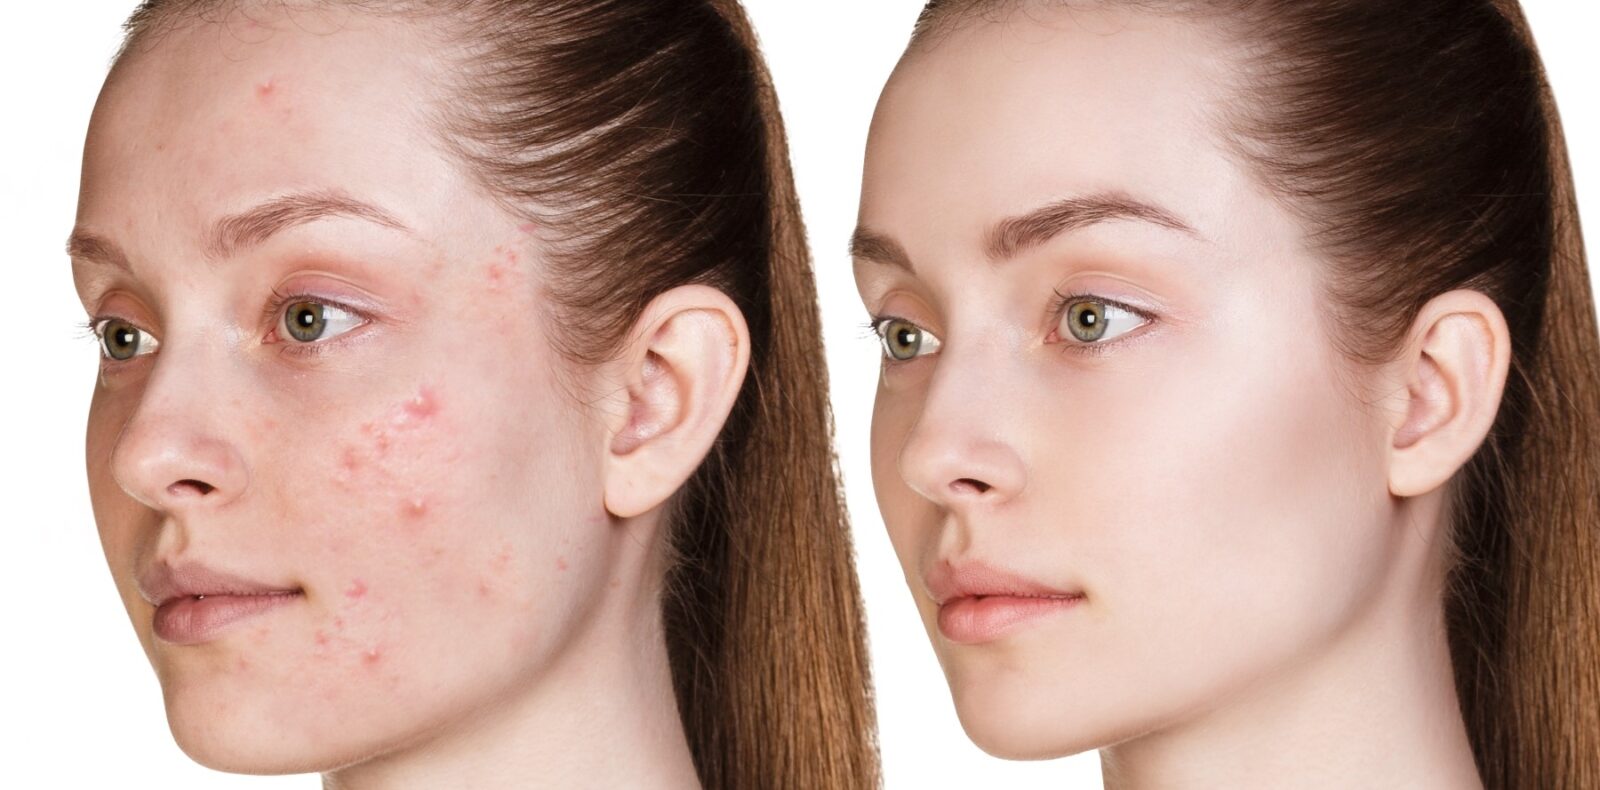 Why Acne Laser Treatment Might Be Right for You